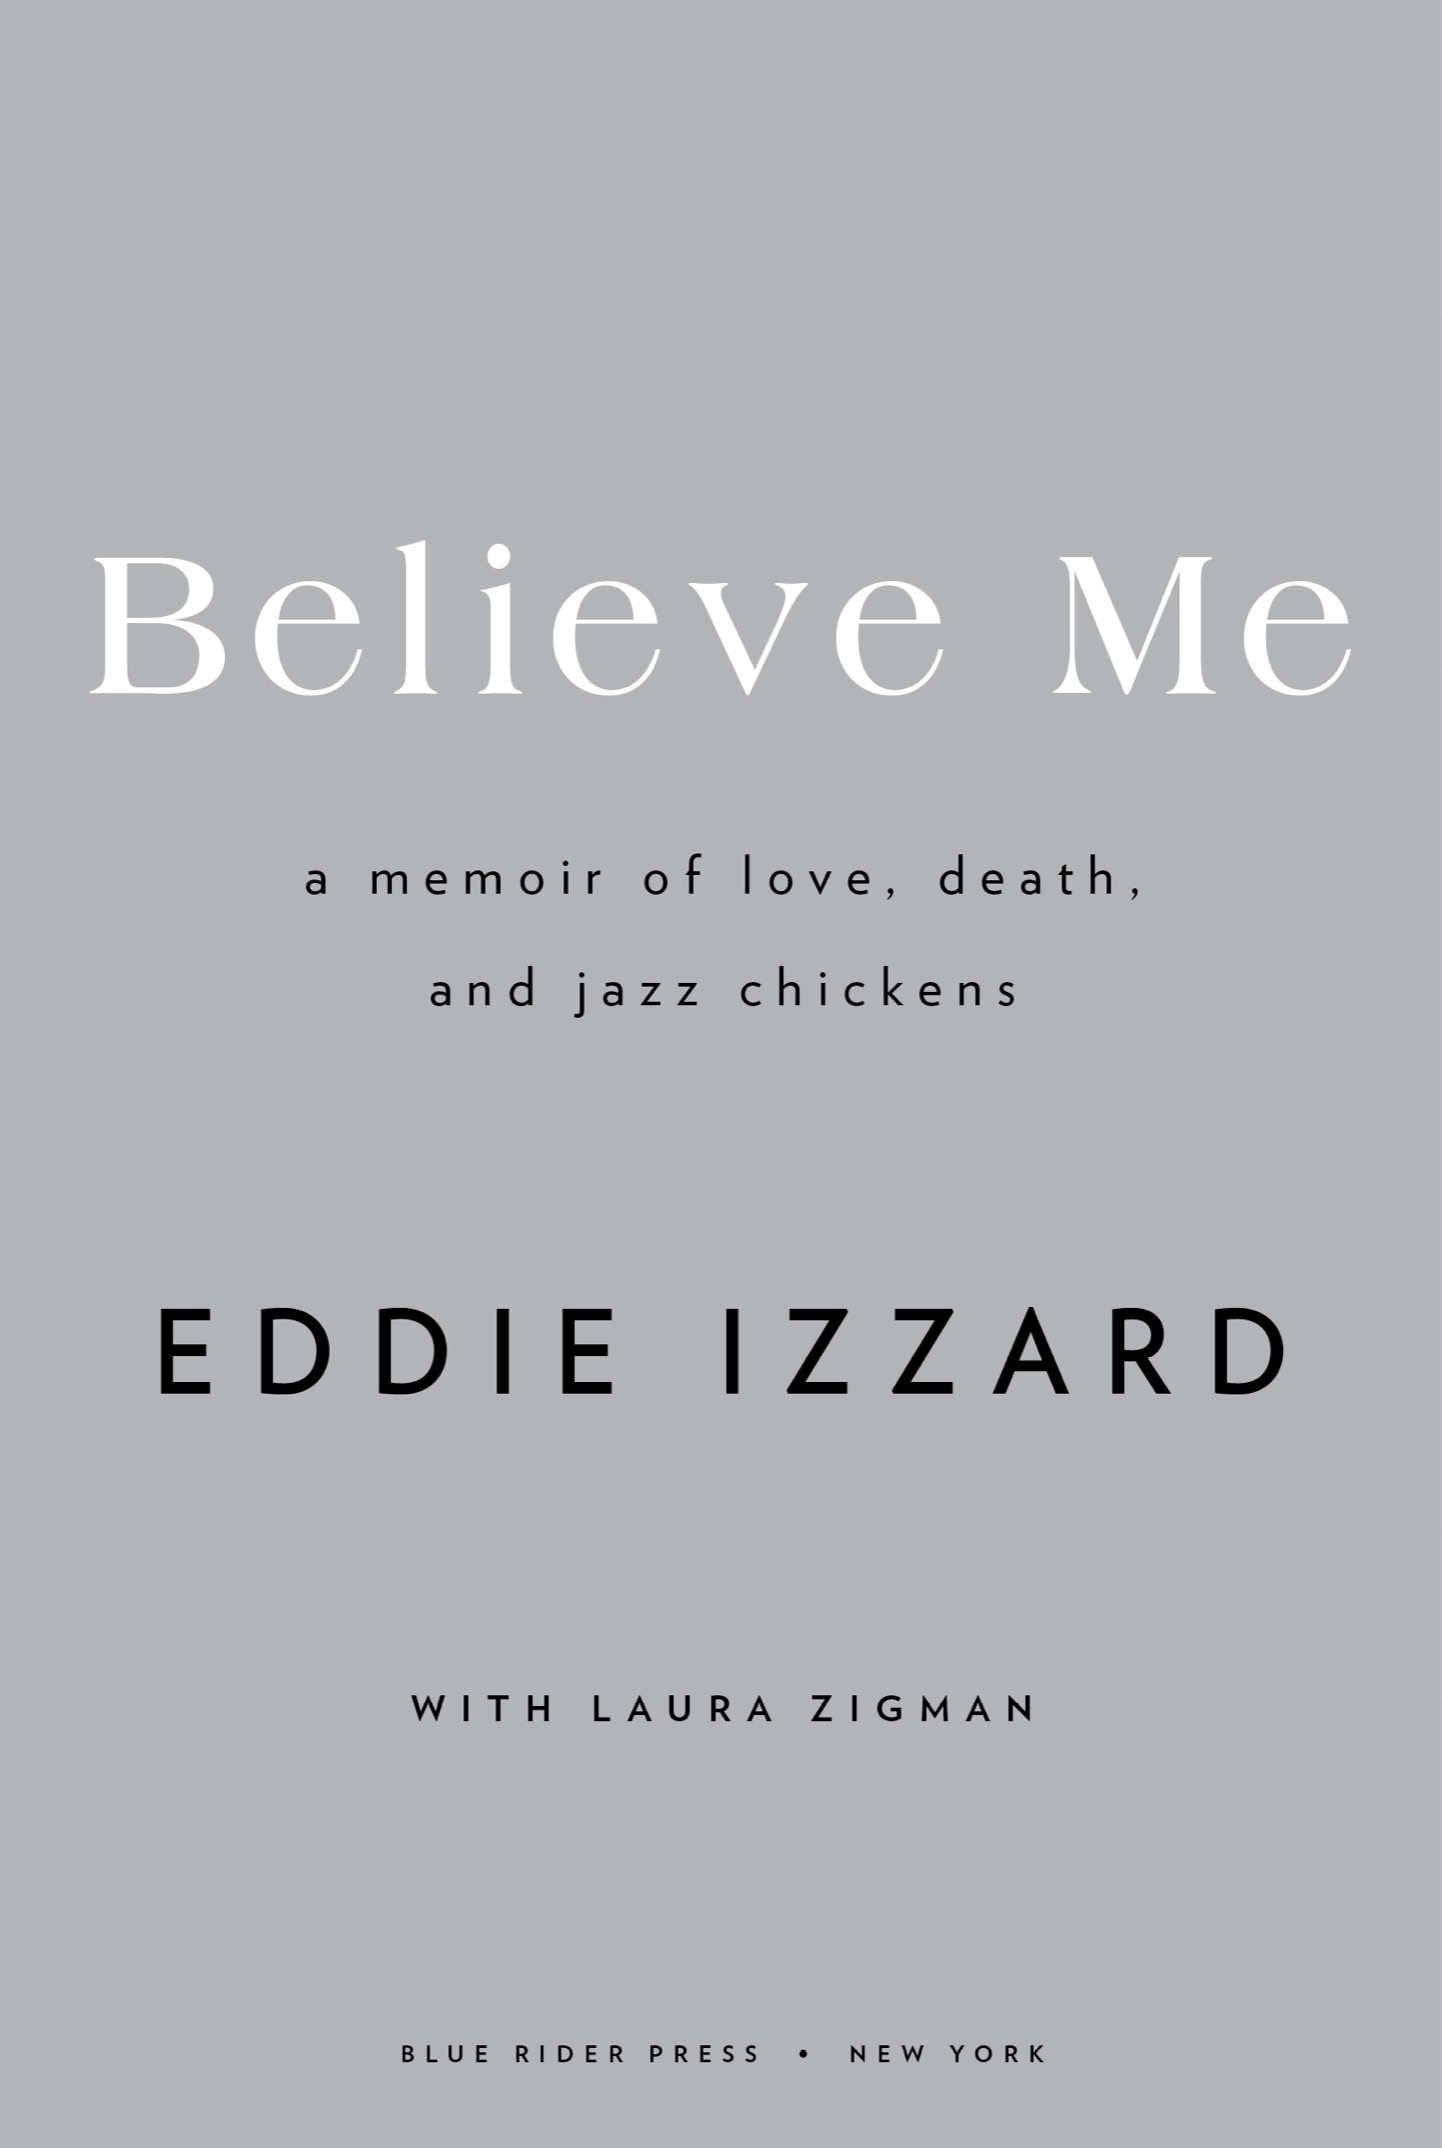 Believe Me A Memoir of Love Death and Jazz Chickens - image 2